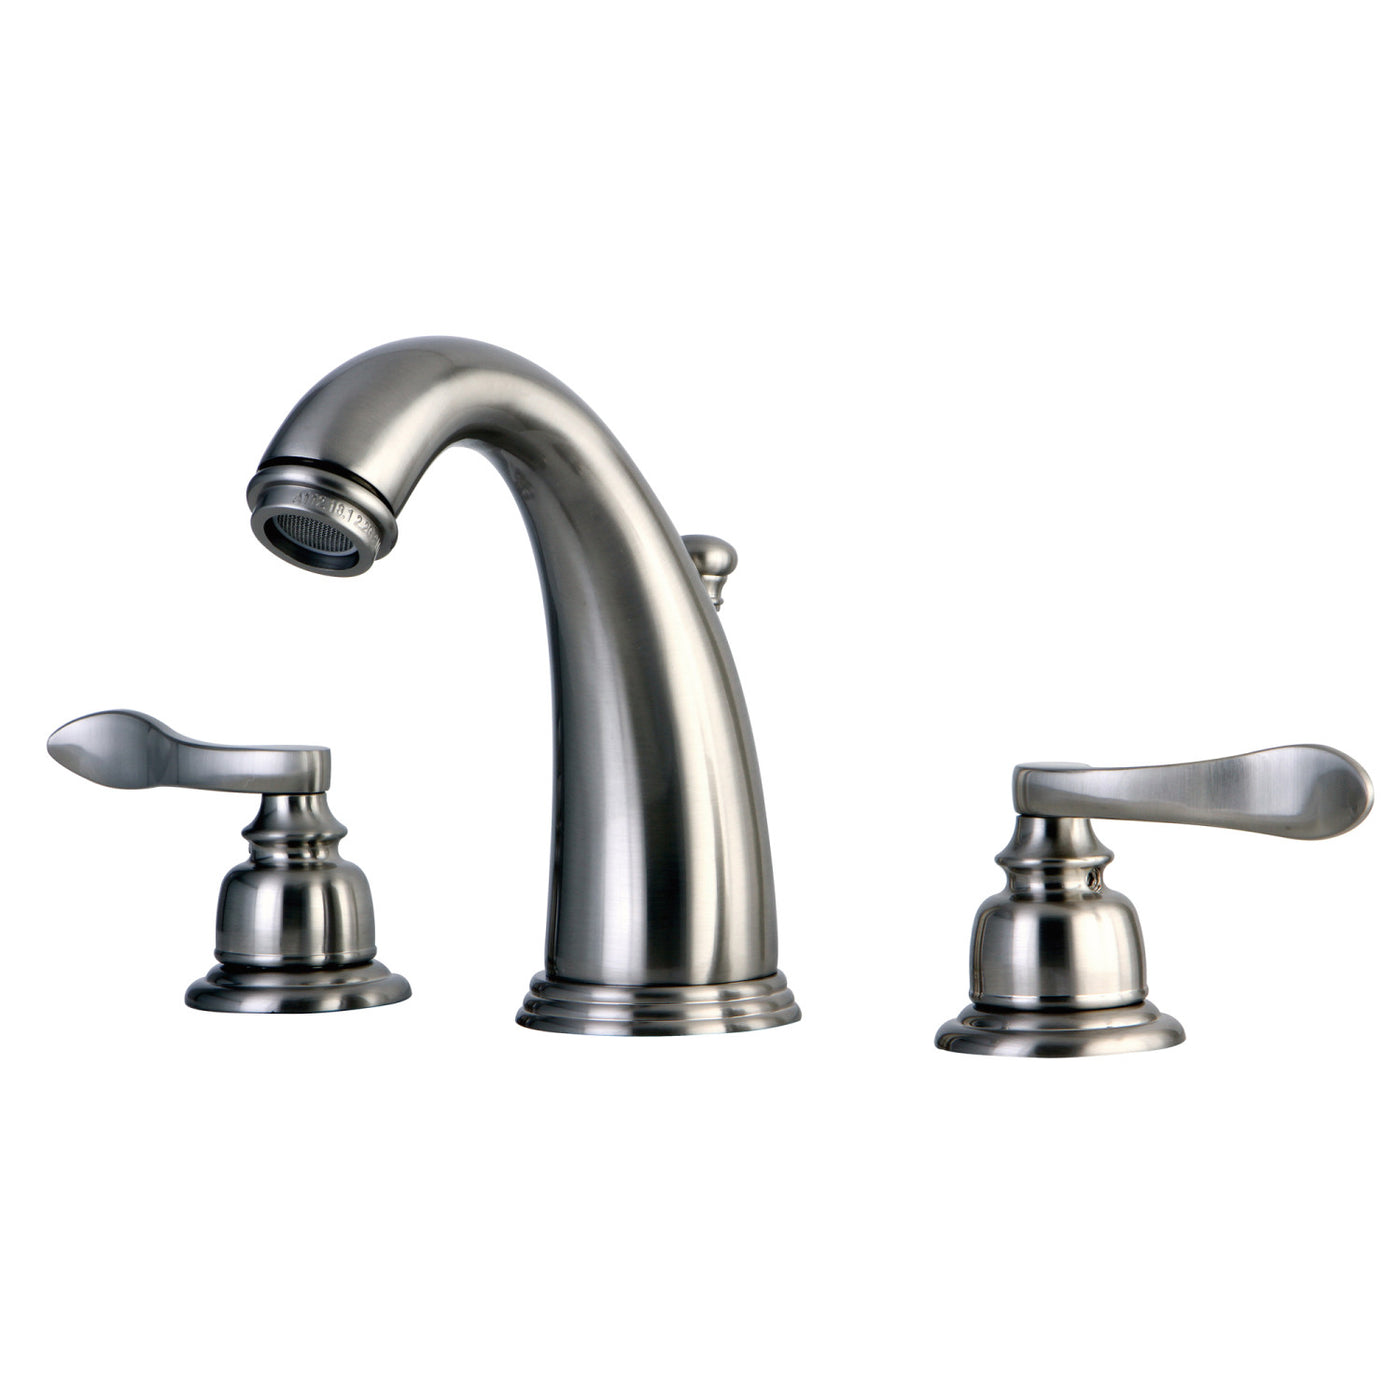 Elements of Design EB8988NFL Widespread Bathroom Faucet with Retail Pop-Up, Brushed Nickel